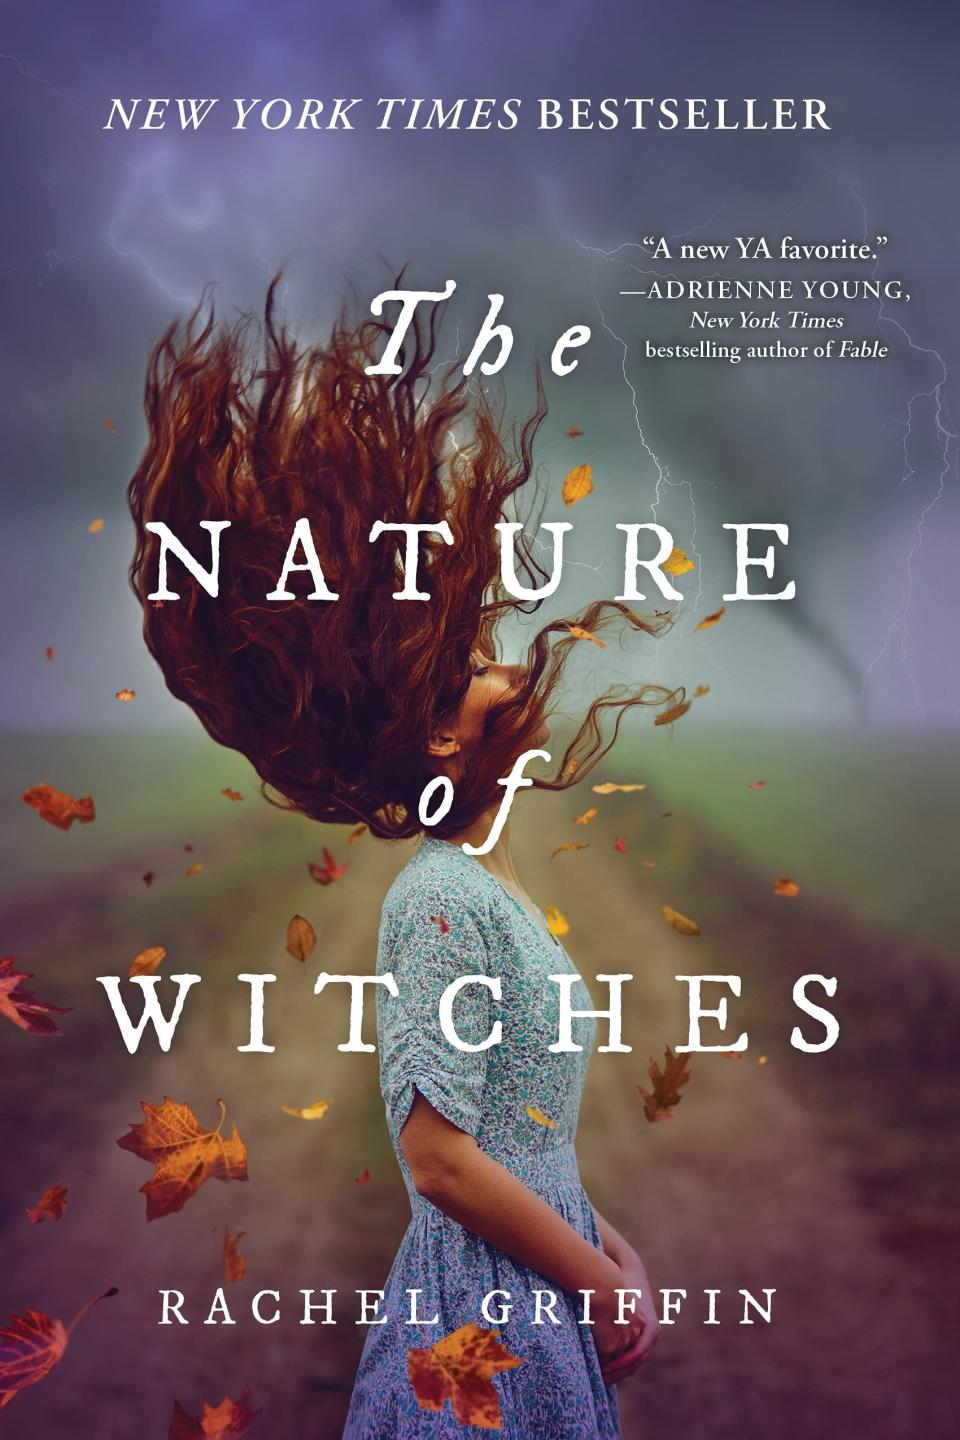 6) The Nature of Witches